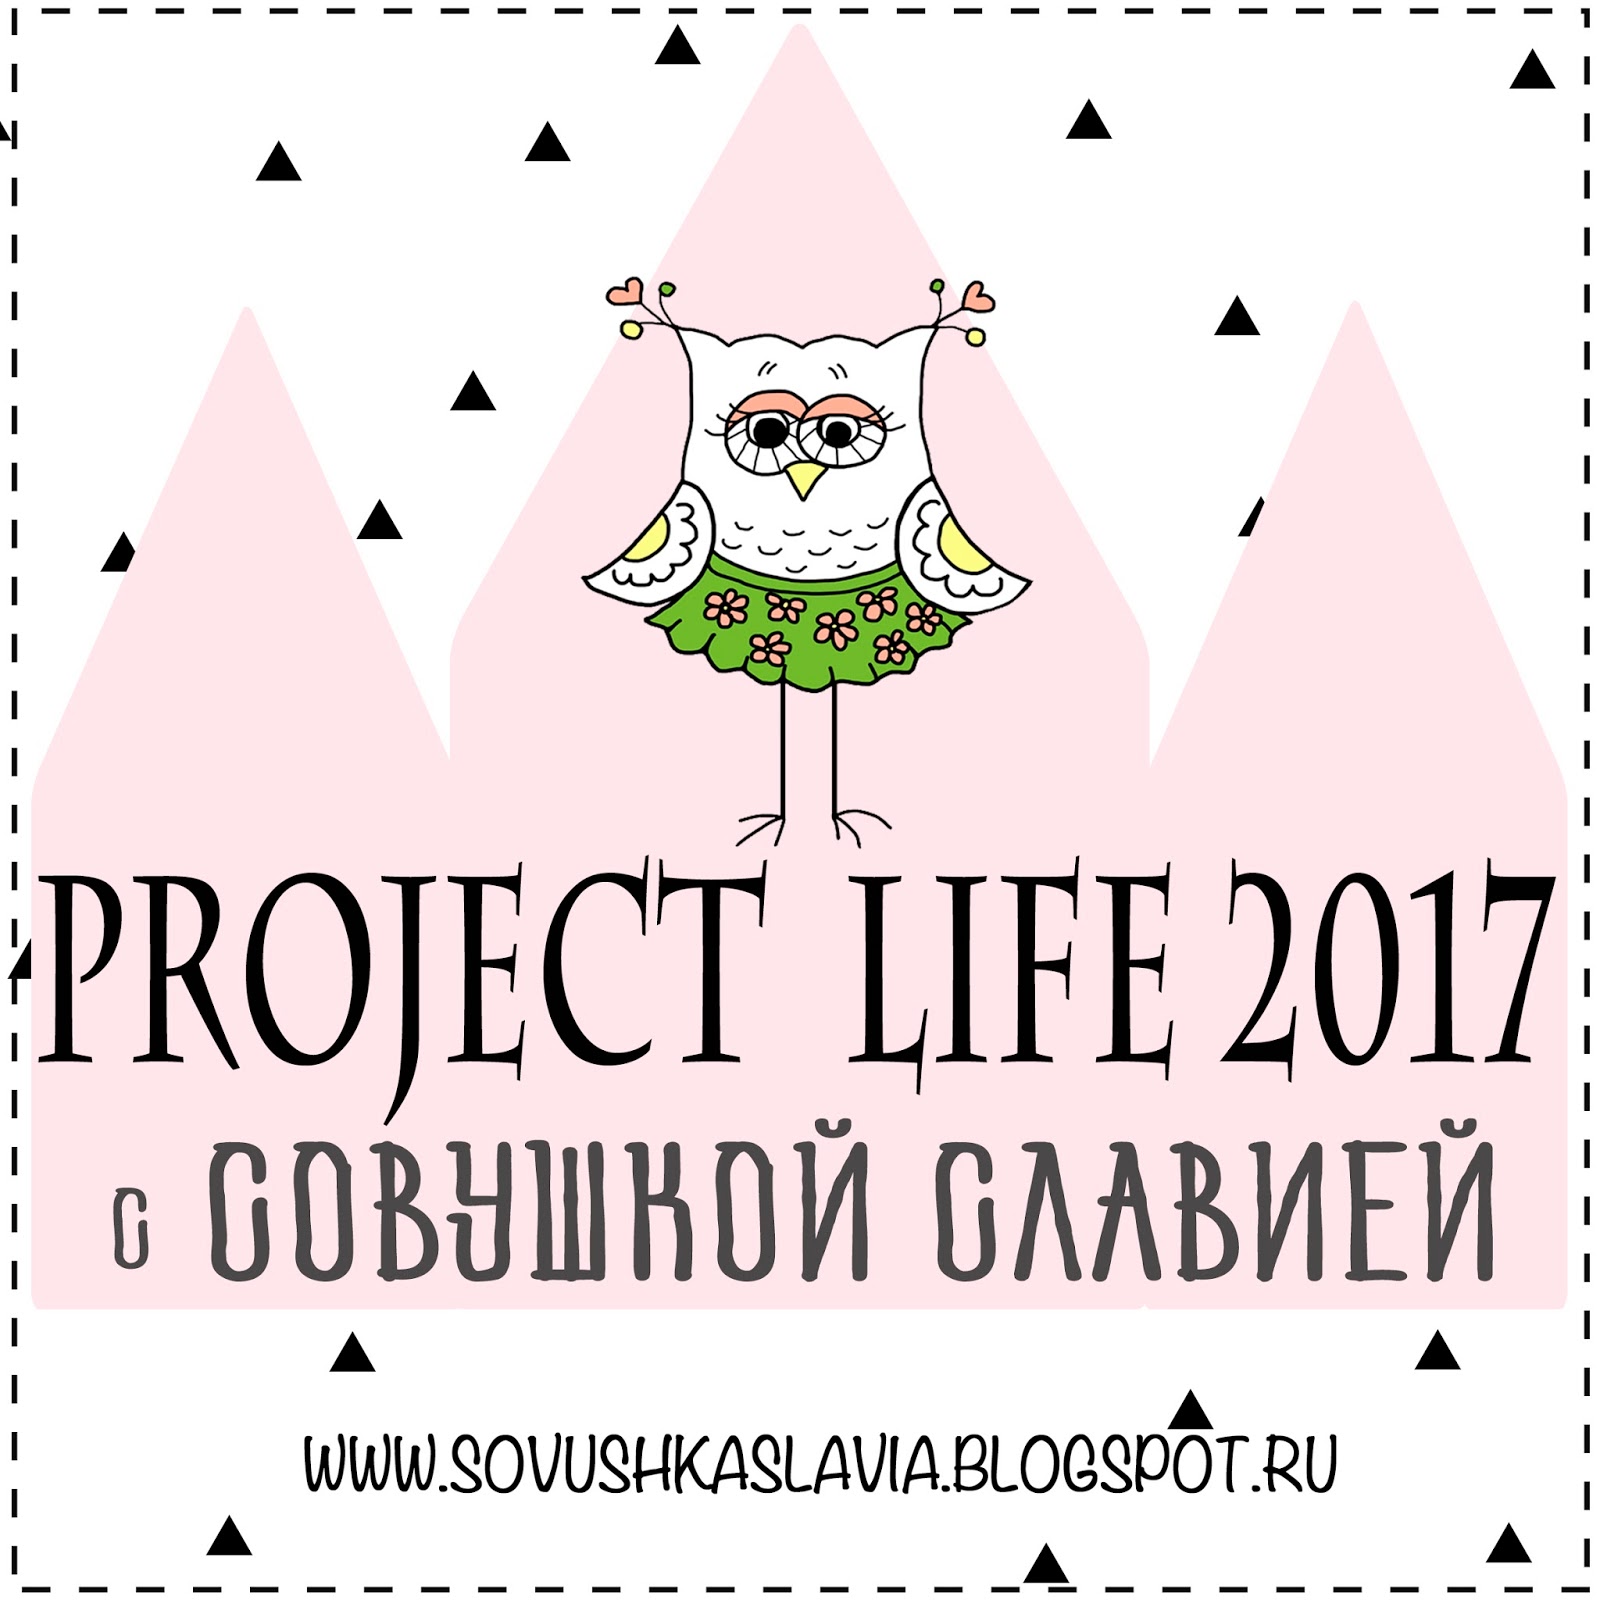 Project Life-2017